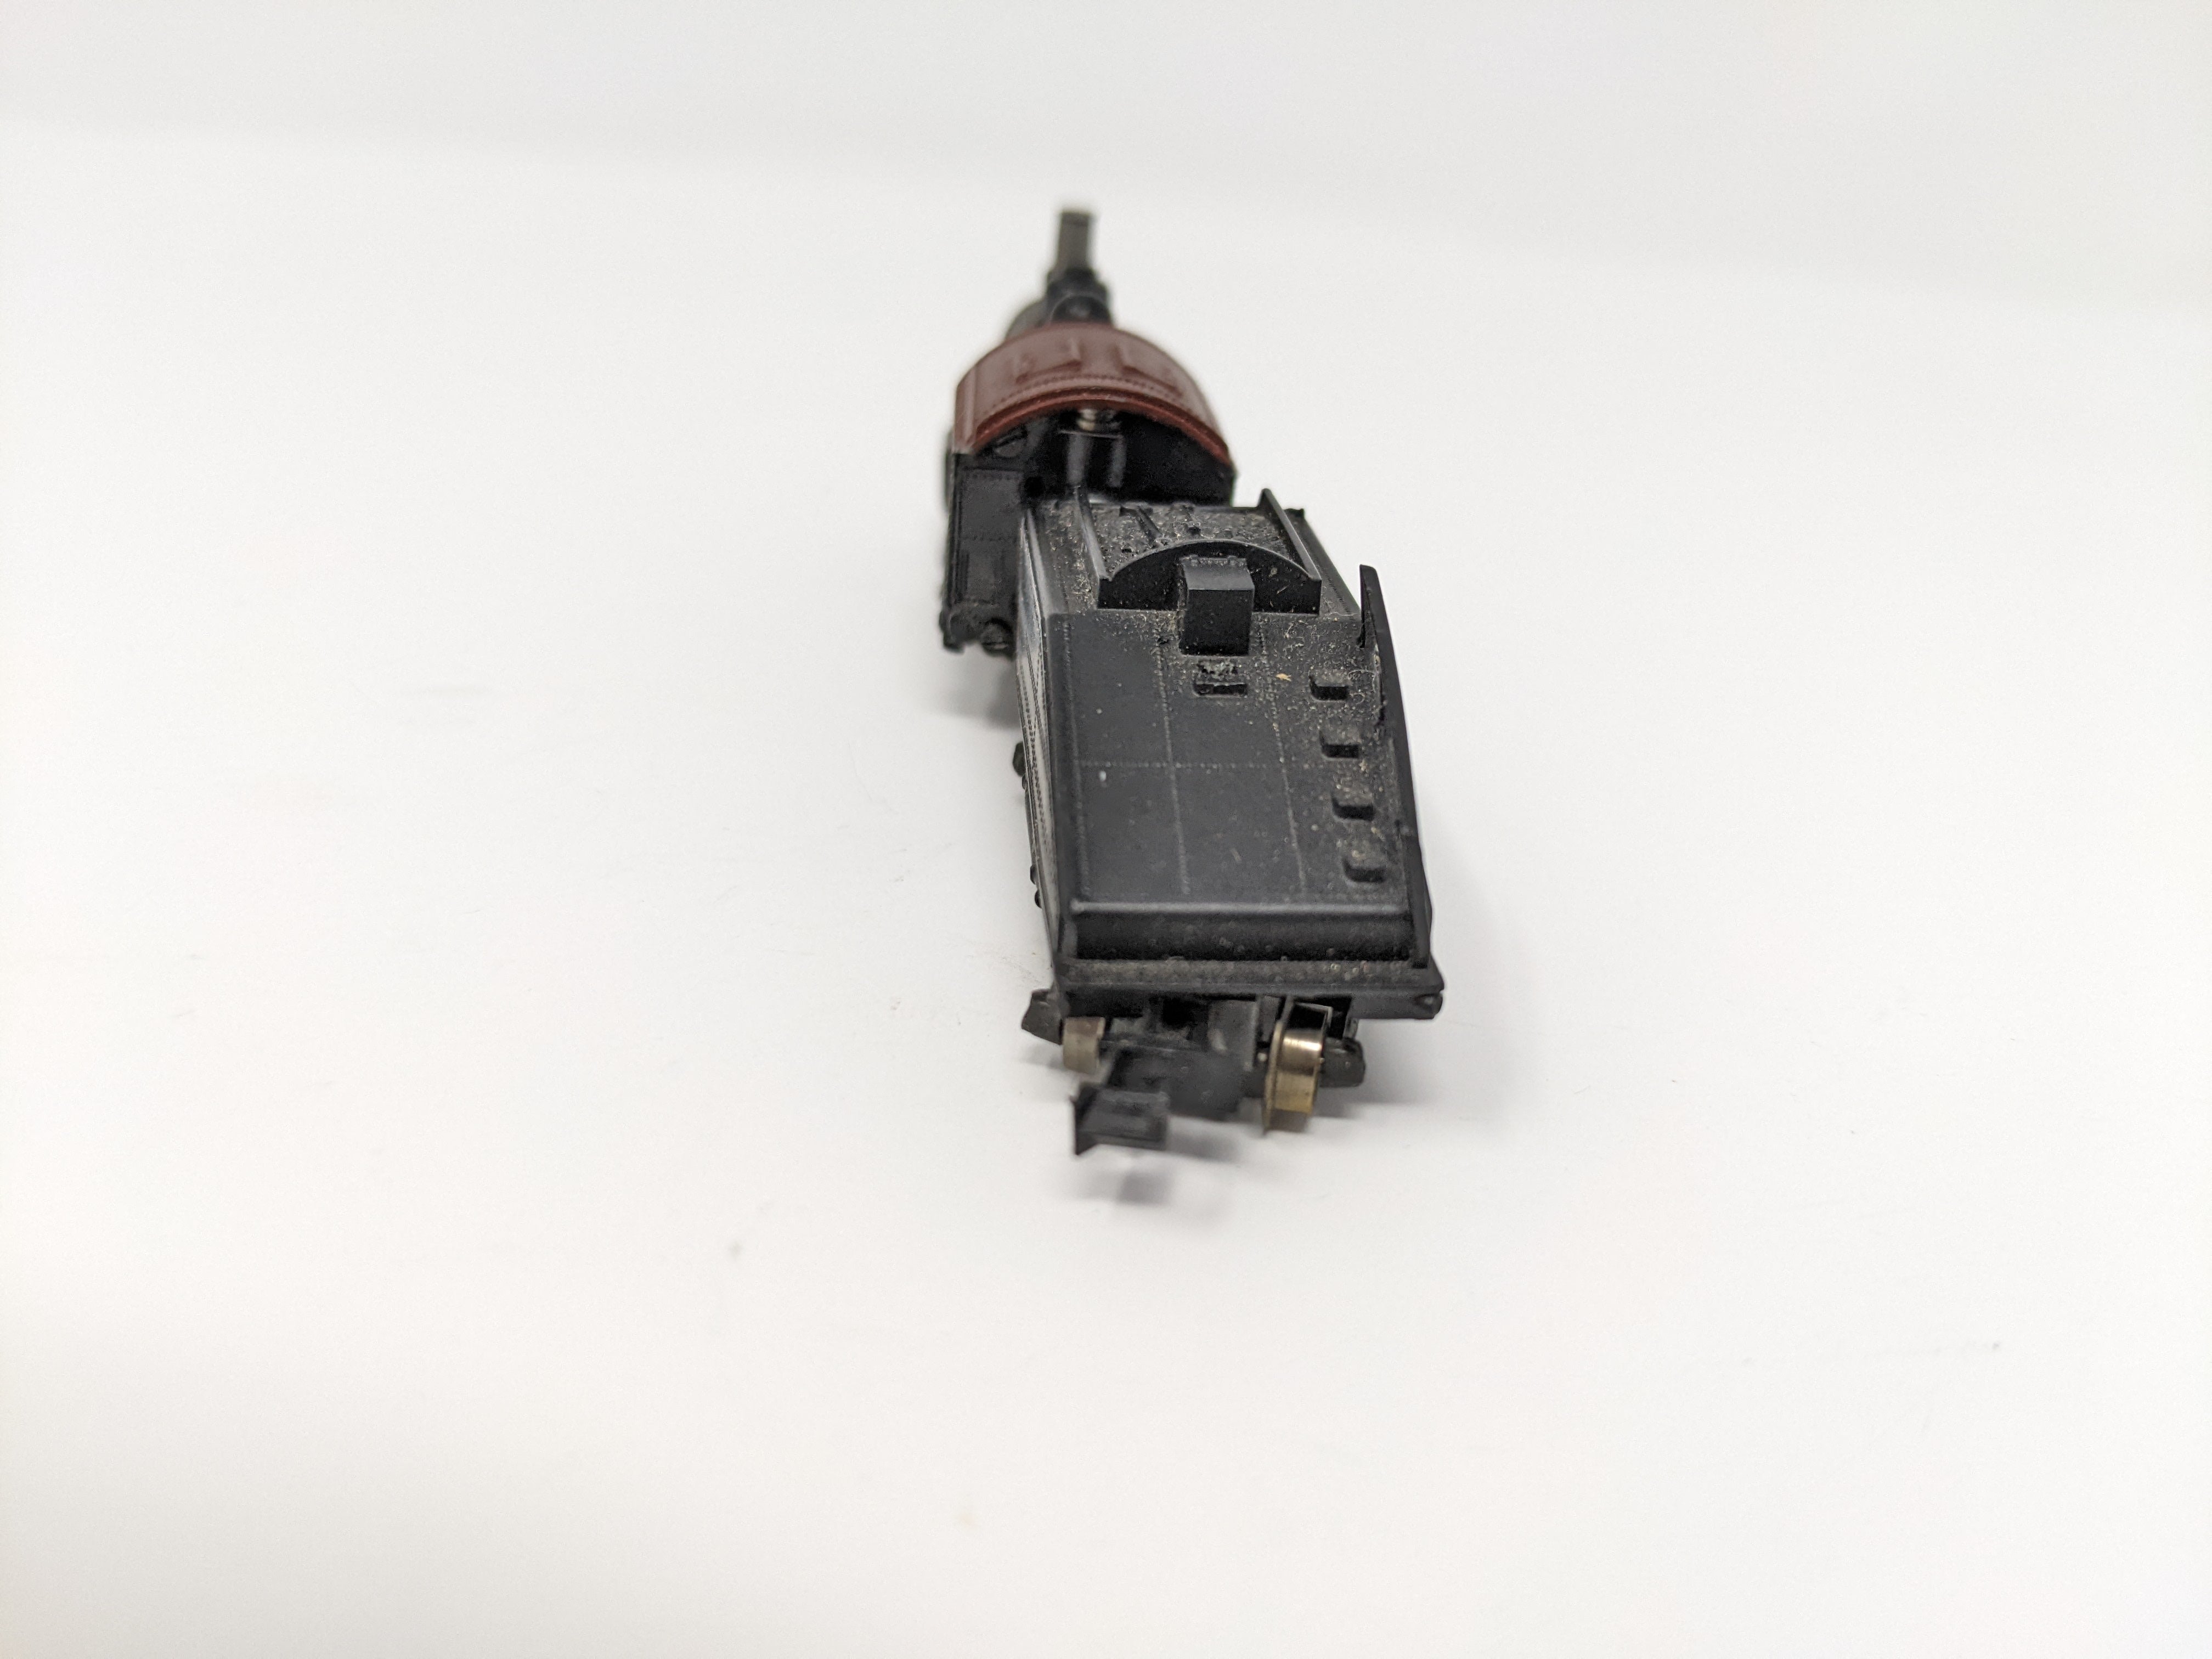 USED Atlas N Scale, 0-4-0 Steam Locomotive (for parts or repairs)#96